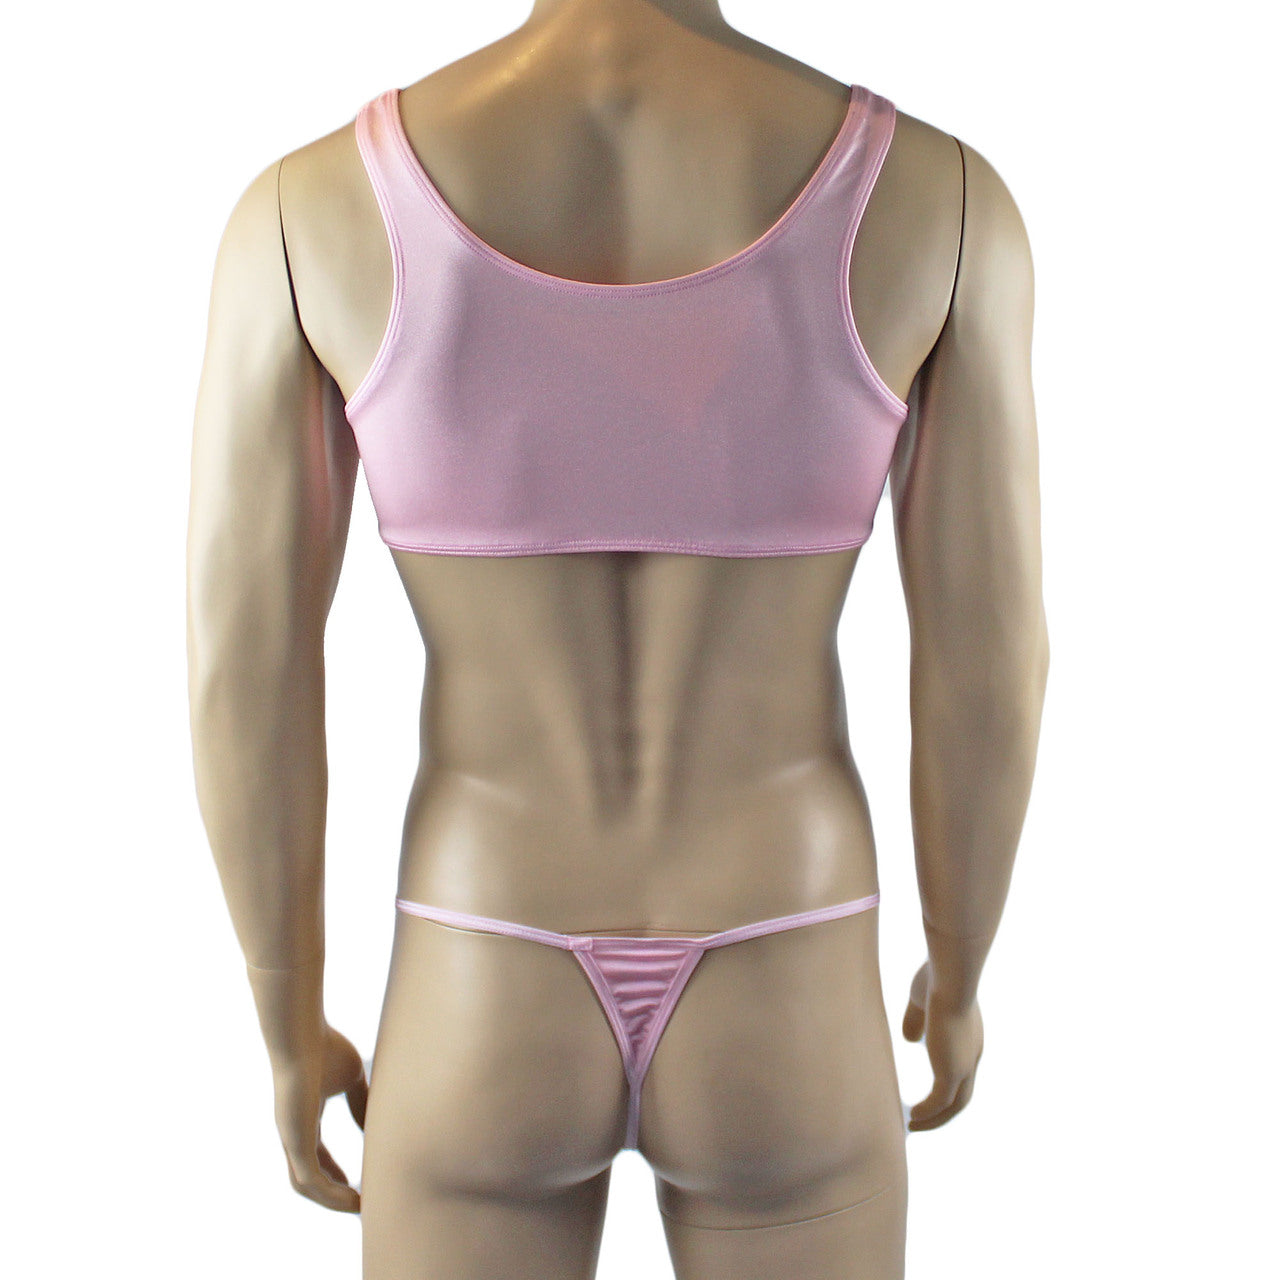 Male Penny Lingerie Bra Top with V Lace front and Pouch G string Light Pink